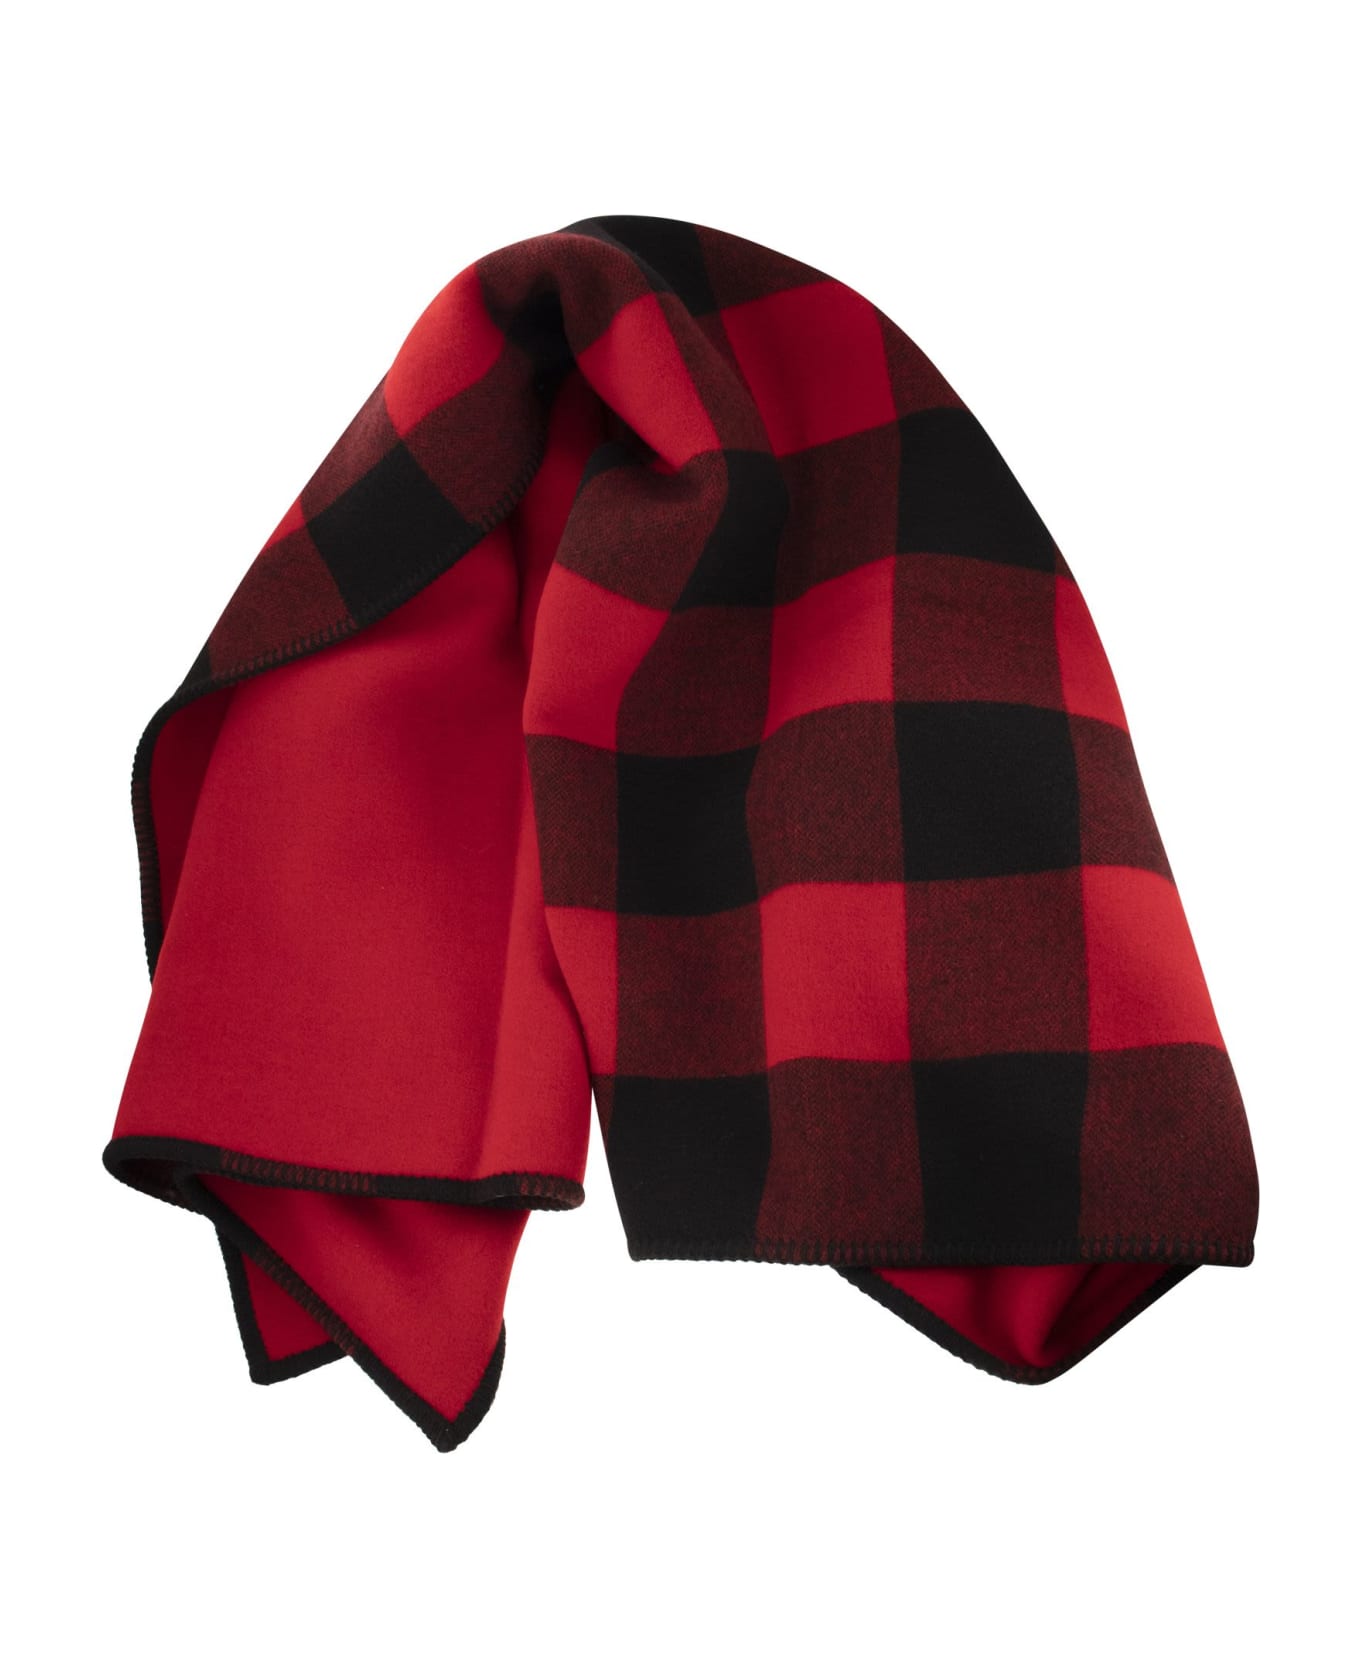 Woolrich Pure Wool Check Scarf - Red/black スカーフ